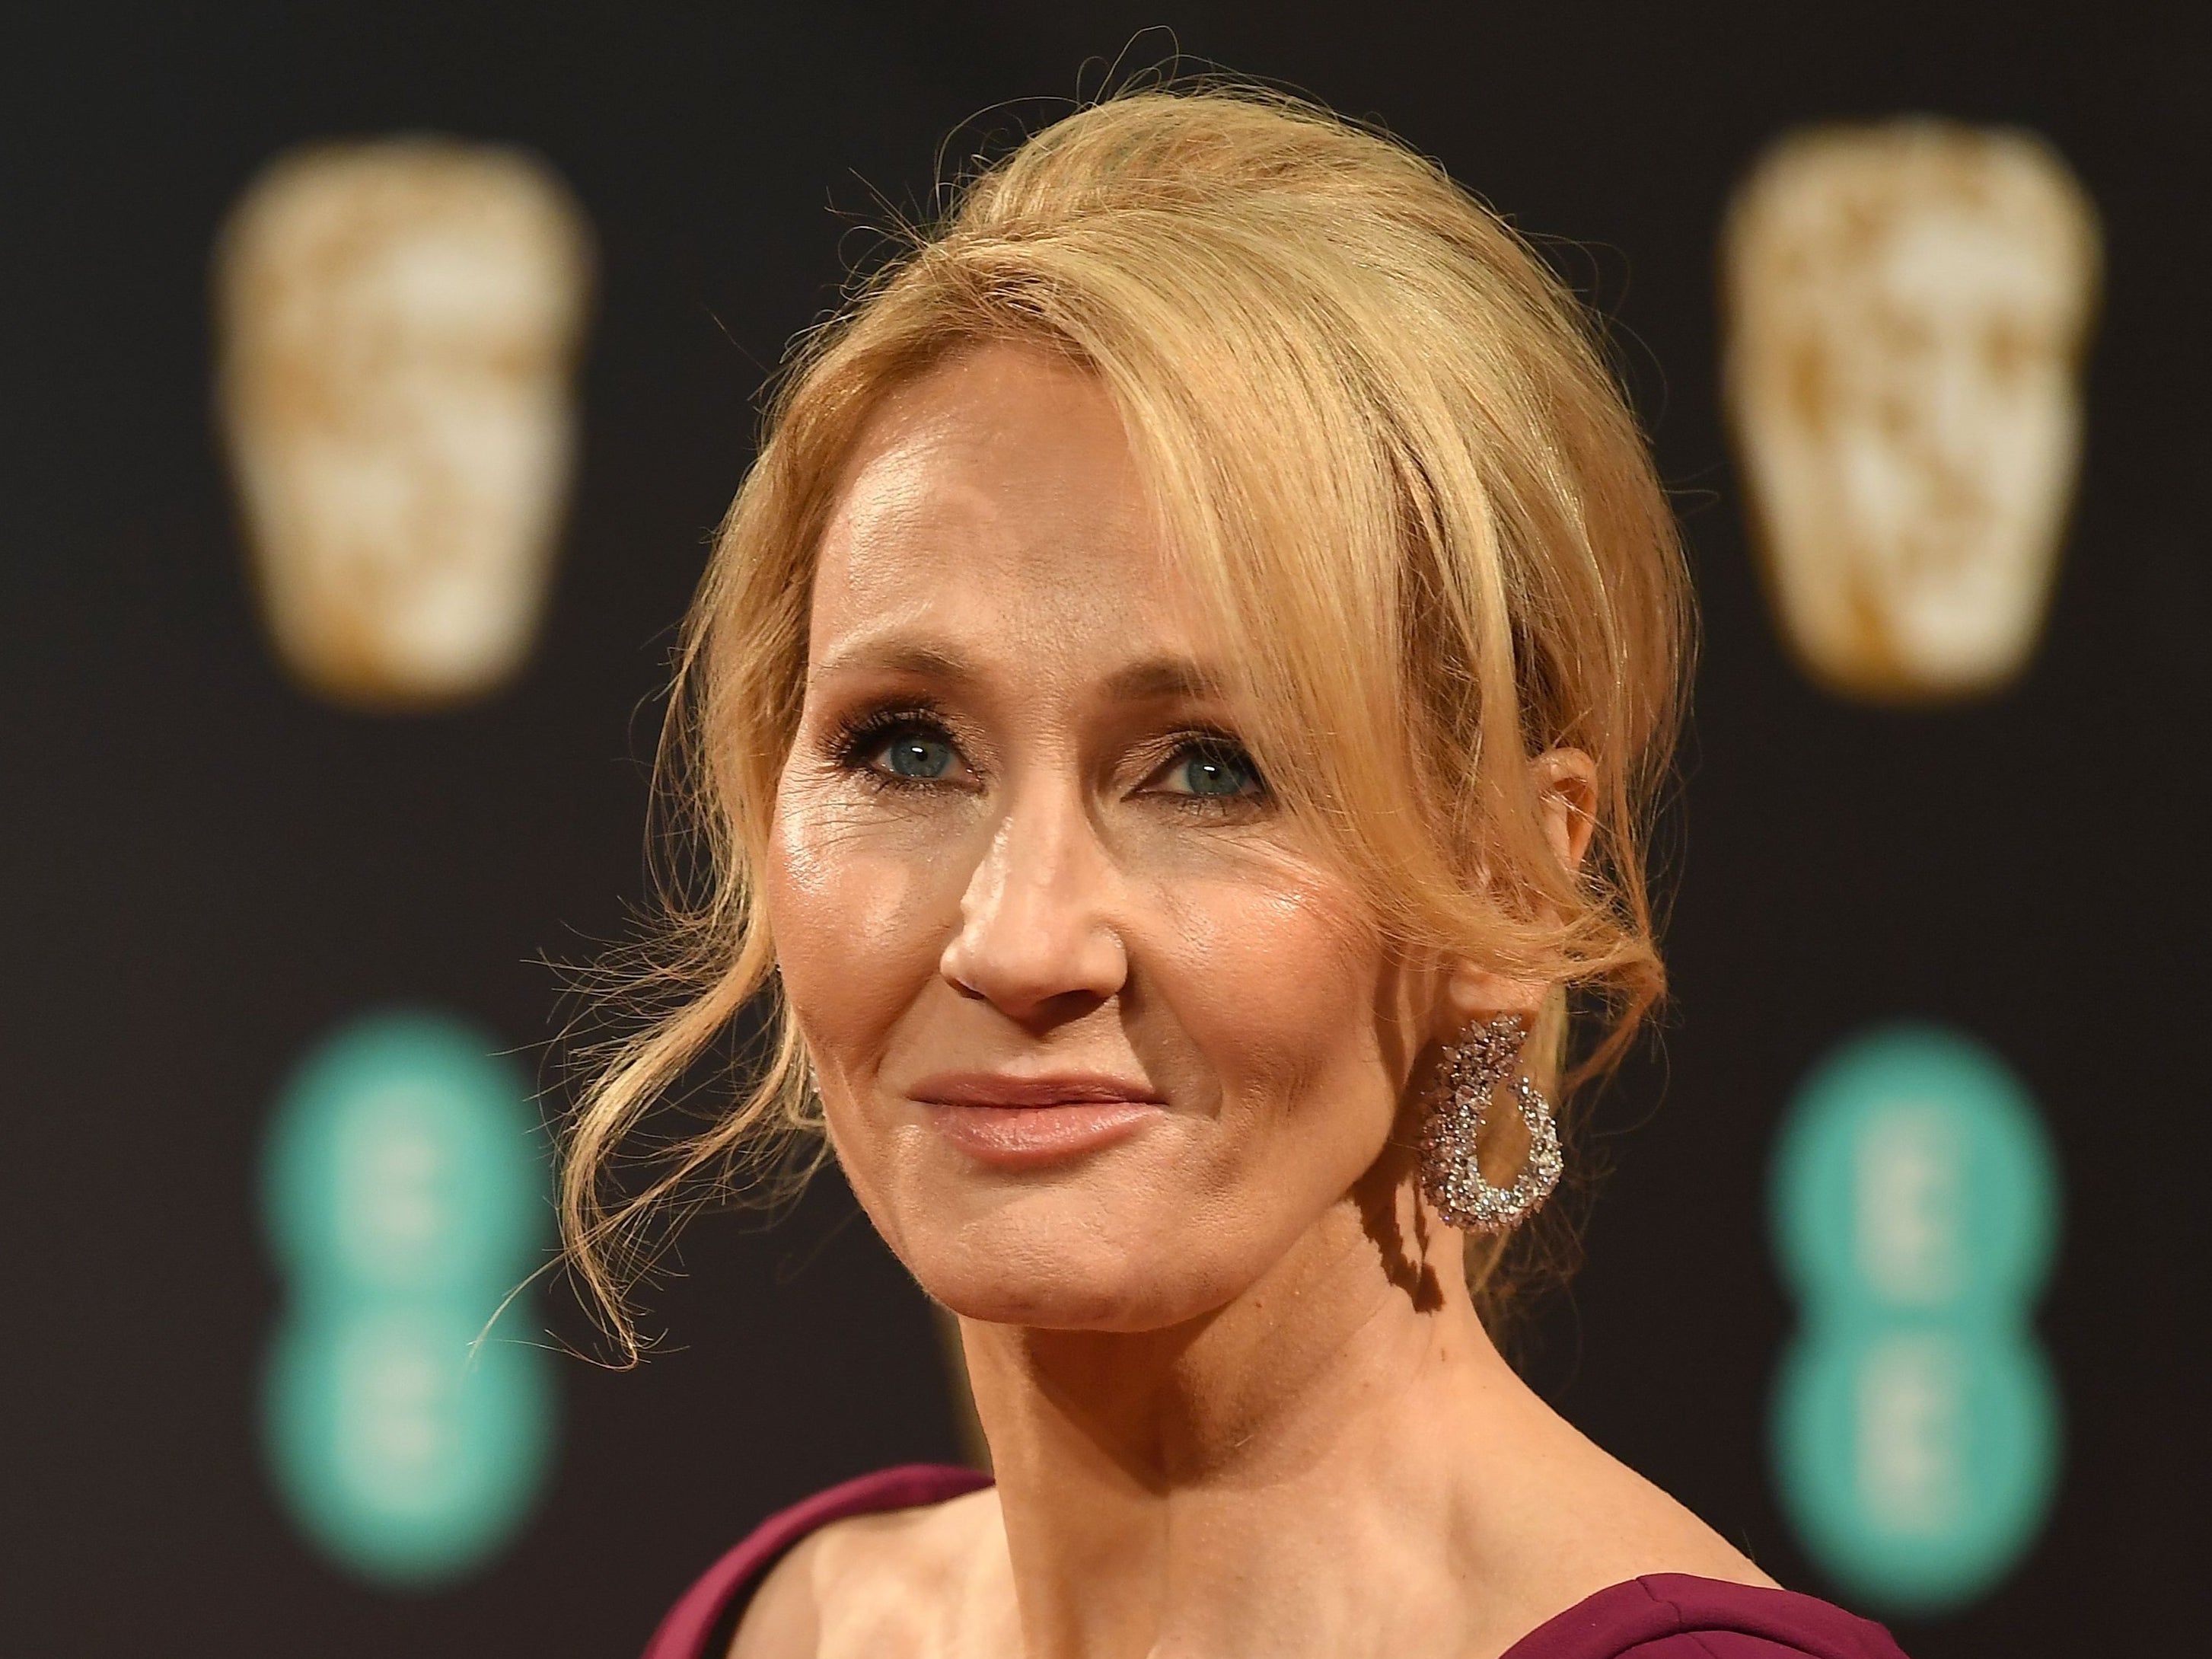 JK Rowling first made controversial comments about the transgender community in December 2019